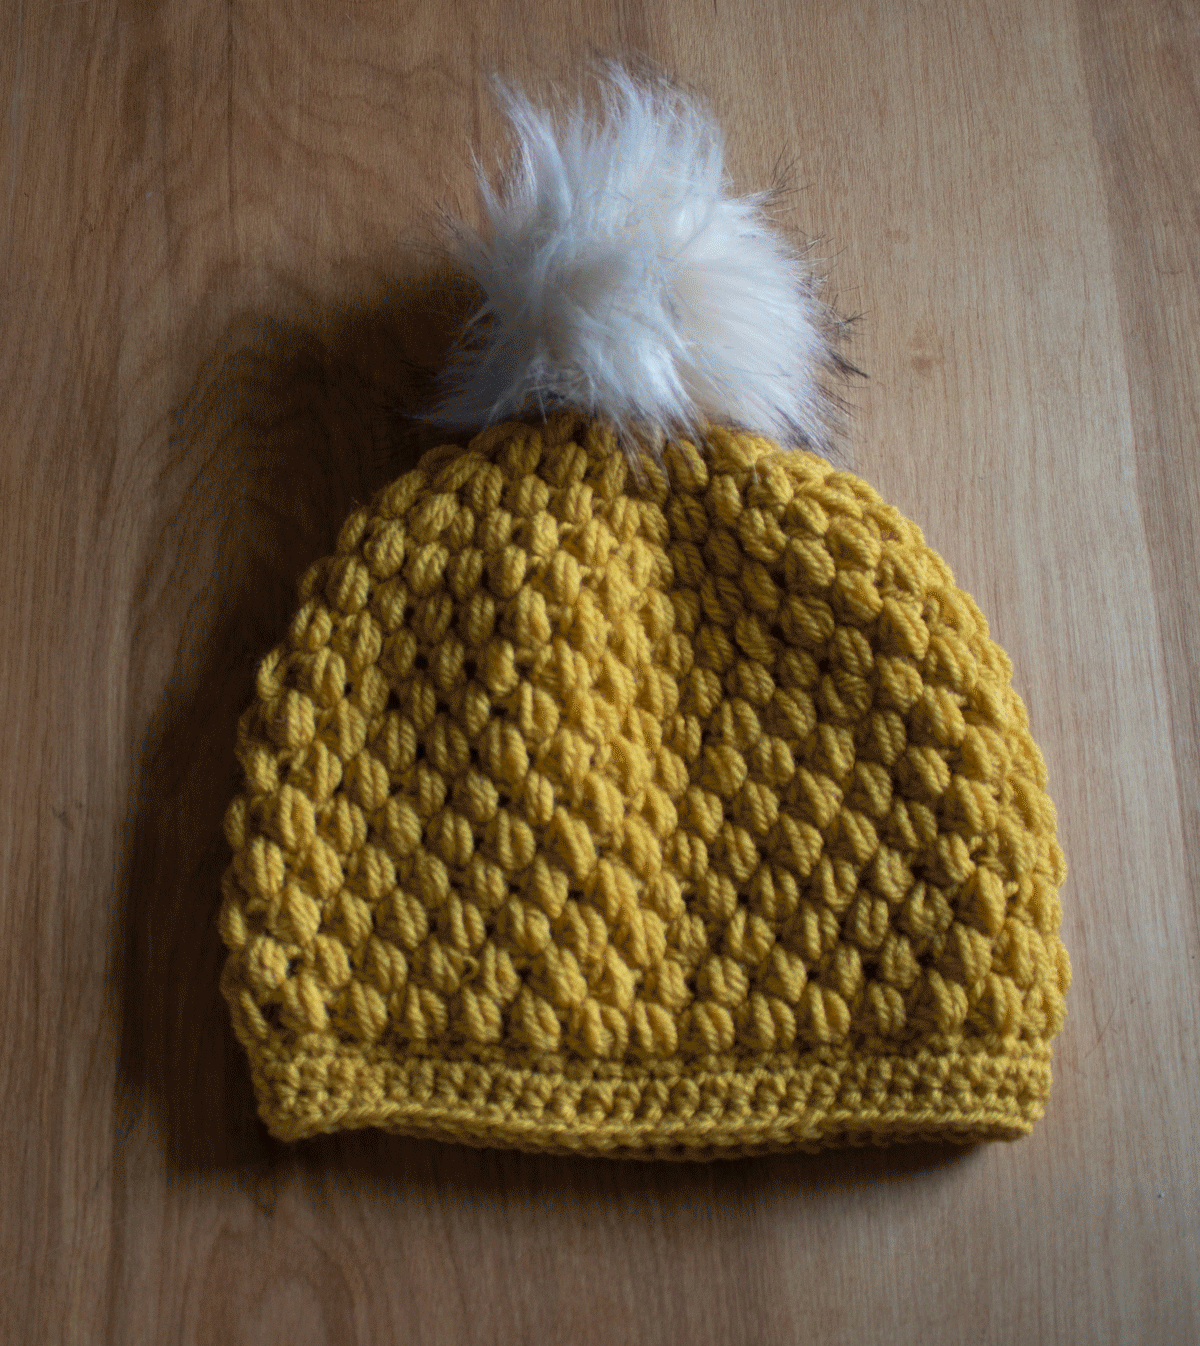 knittedhome customize your knit crochet beanie hat